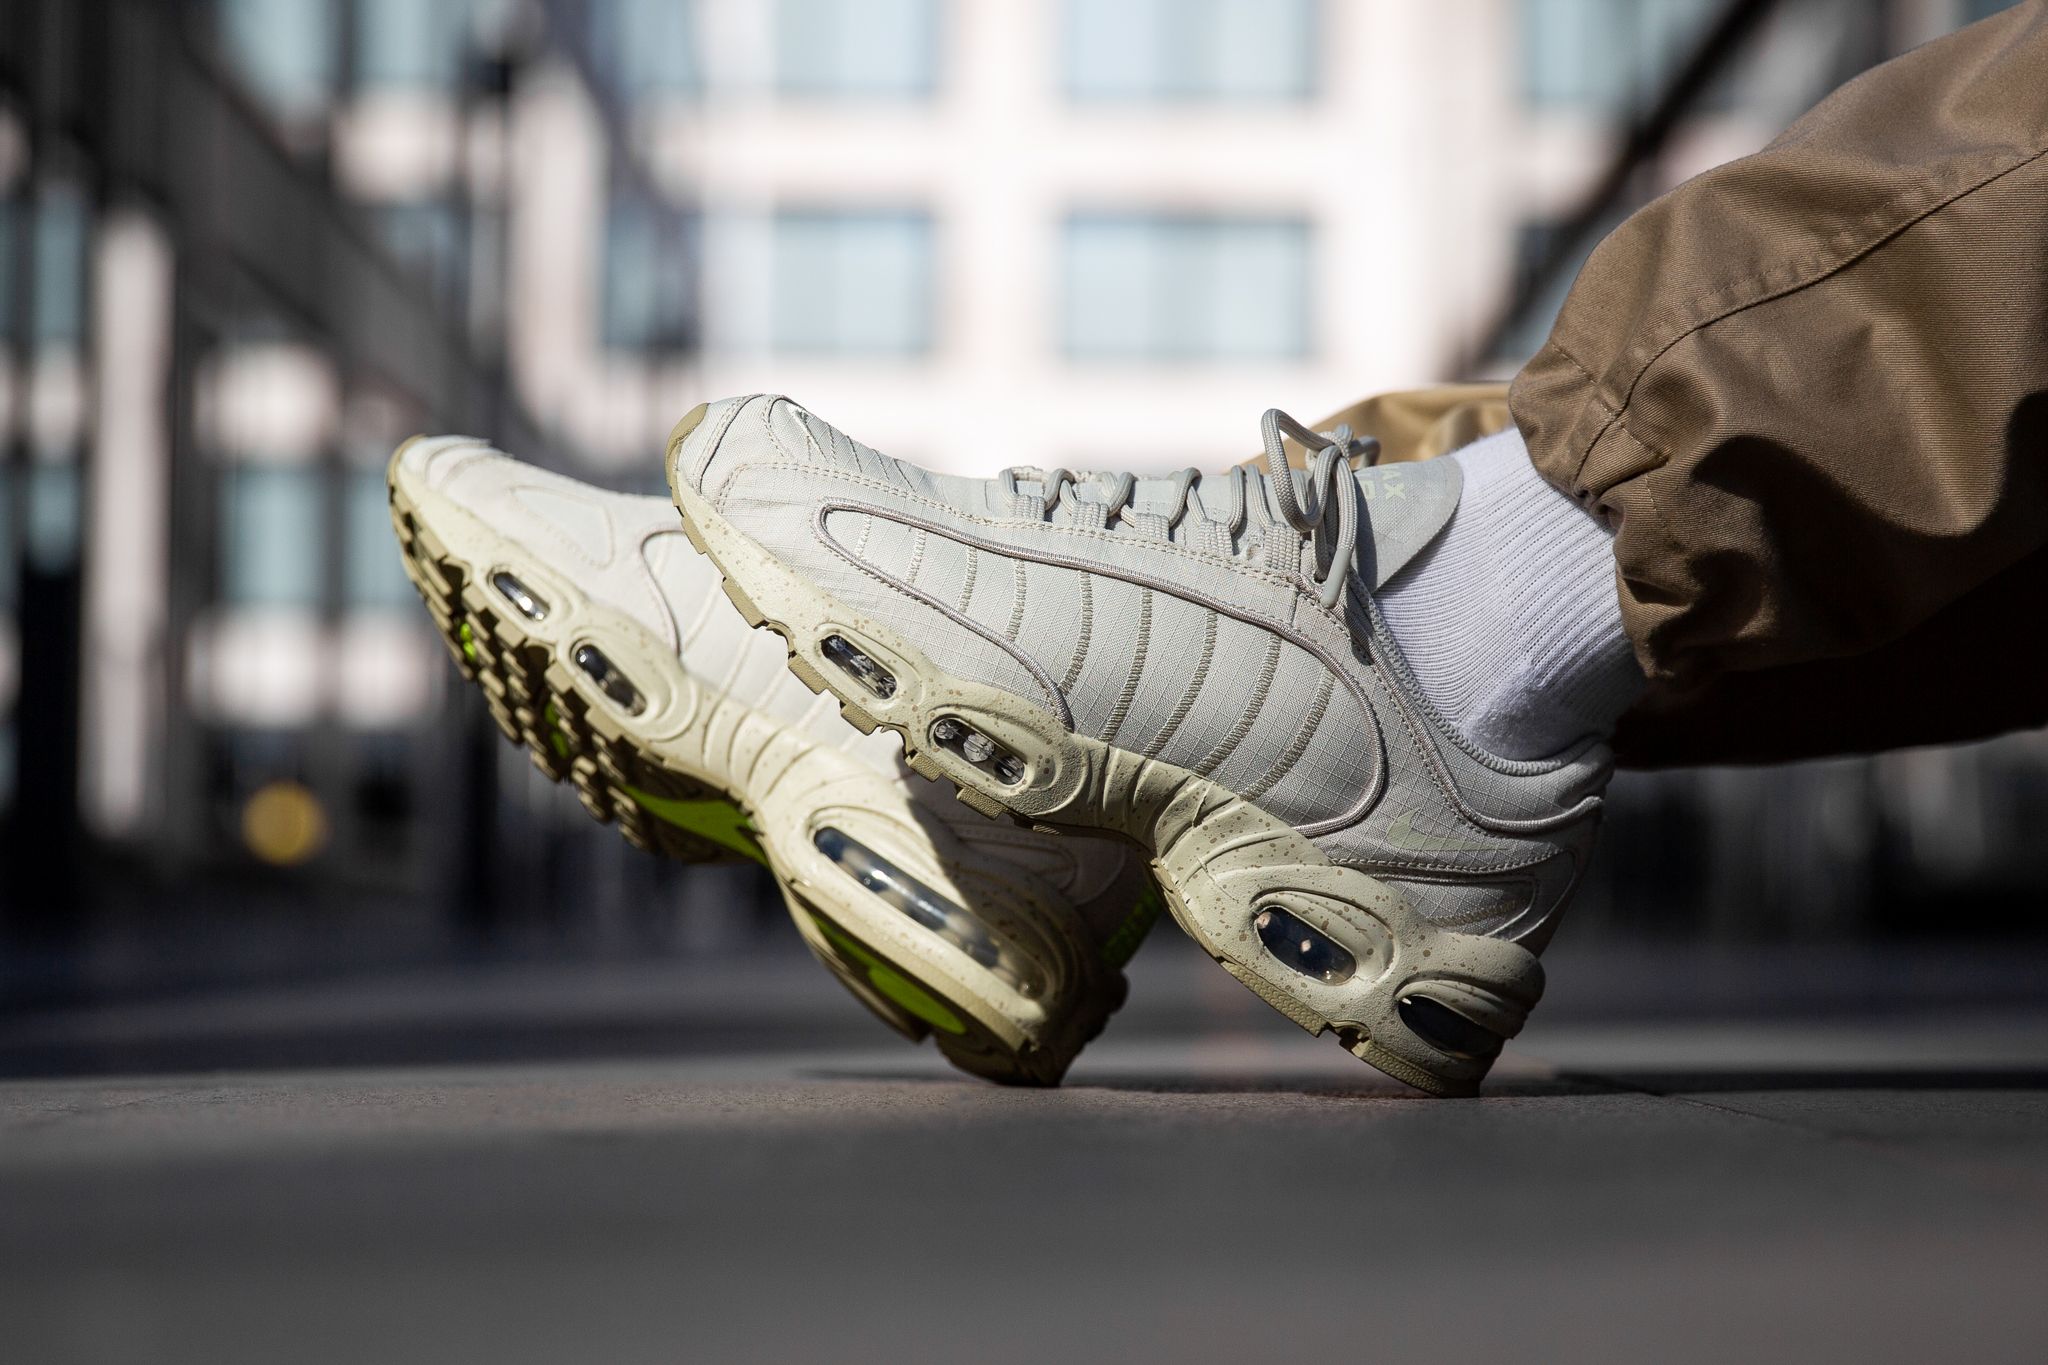 ideología manga Sentimental Titolo on Twitter: "COMING 🔜 Nike Air Max Tailwind IV SP "Sandtrap"  launches Thursday, 27th June online 9AM CET at https://t.co/GHTMjj2KeY  check it out ➡️ https://t.co/cATpp1yWFy US 6.5 (39) - US 13 (